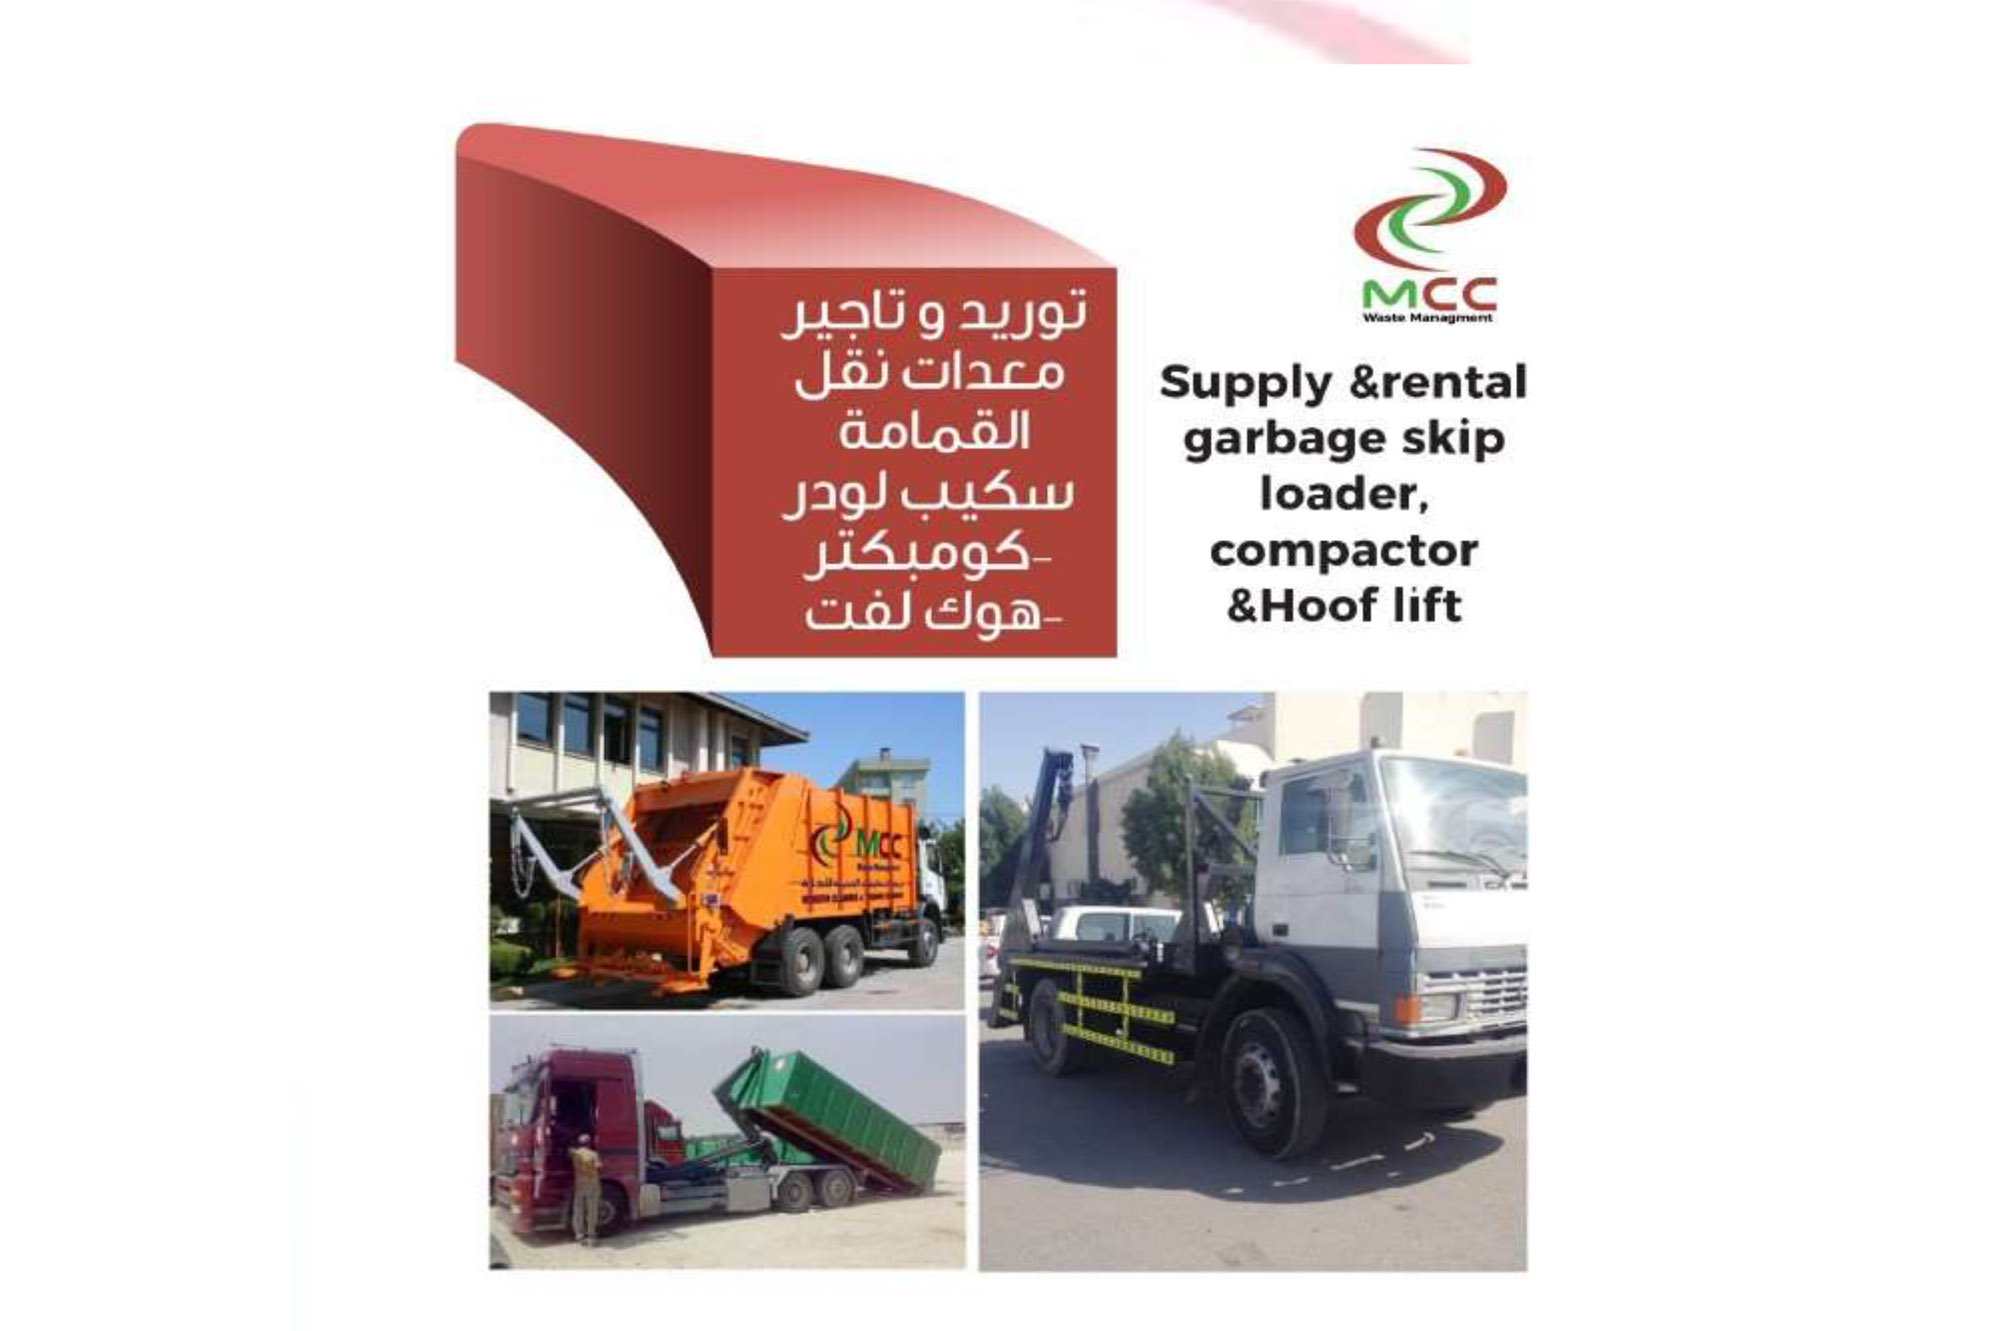 Supply and Rental Garbage truck, Skip Loader, Compactor and Hook Lift in Qatar